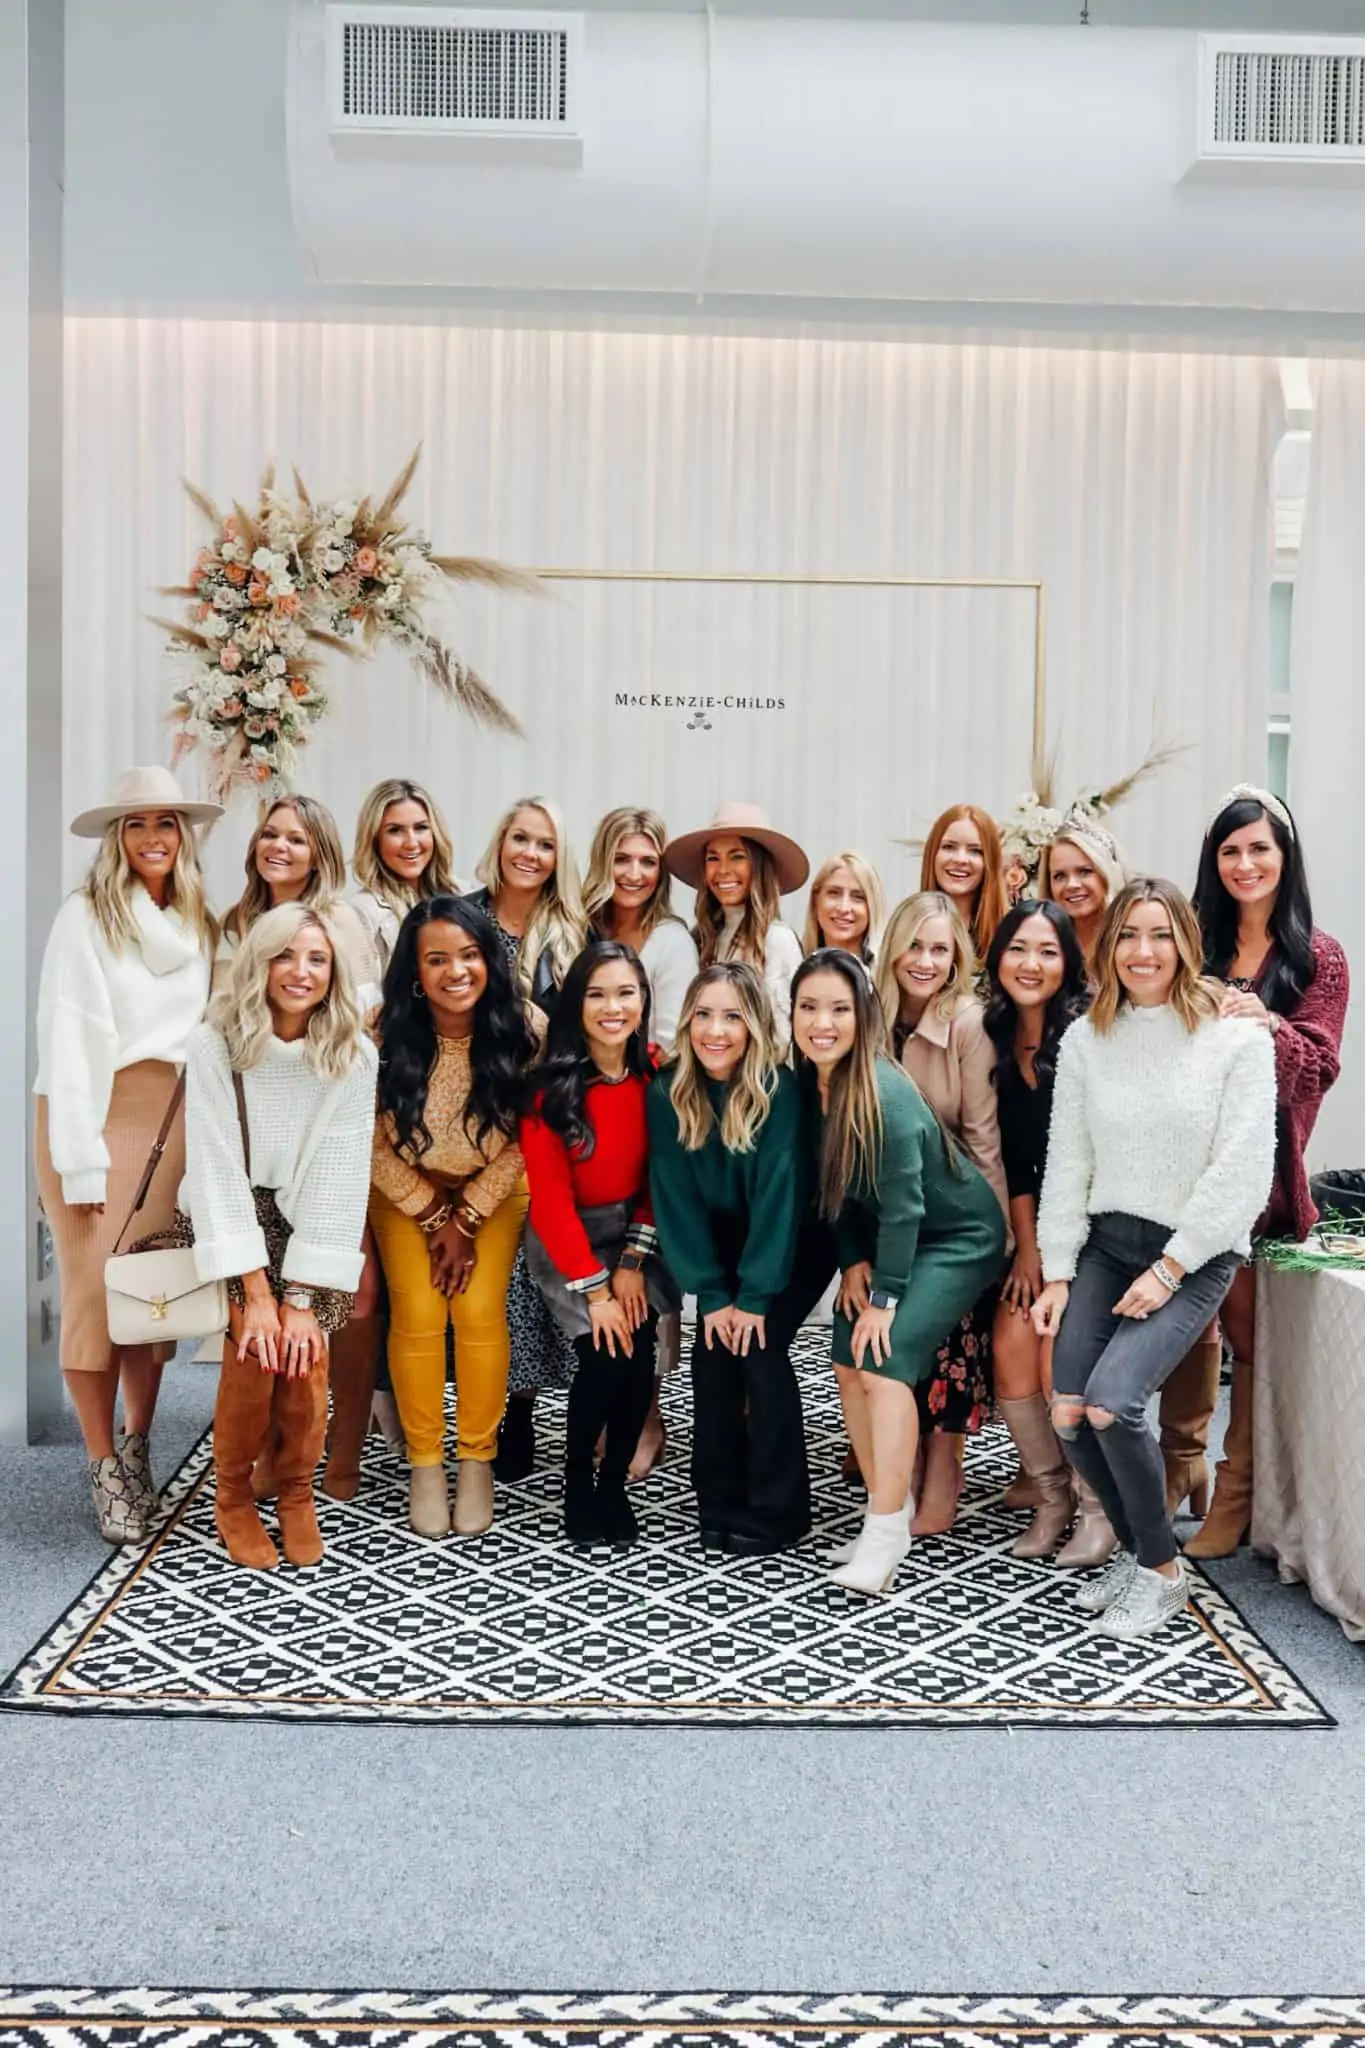 MacKenzie Childs Table Setting Ideas by popular Texas life and style blog, Glamorous Versatility: image of Texas bloggers at a MacKenzie Childs event.